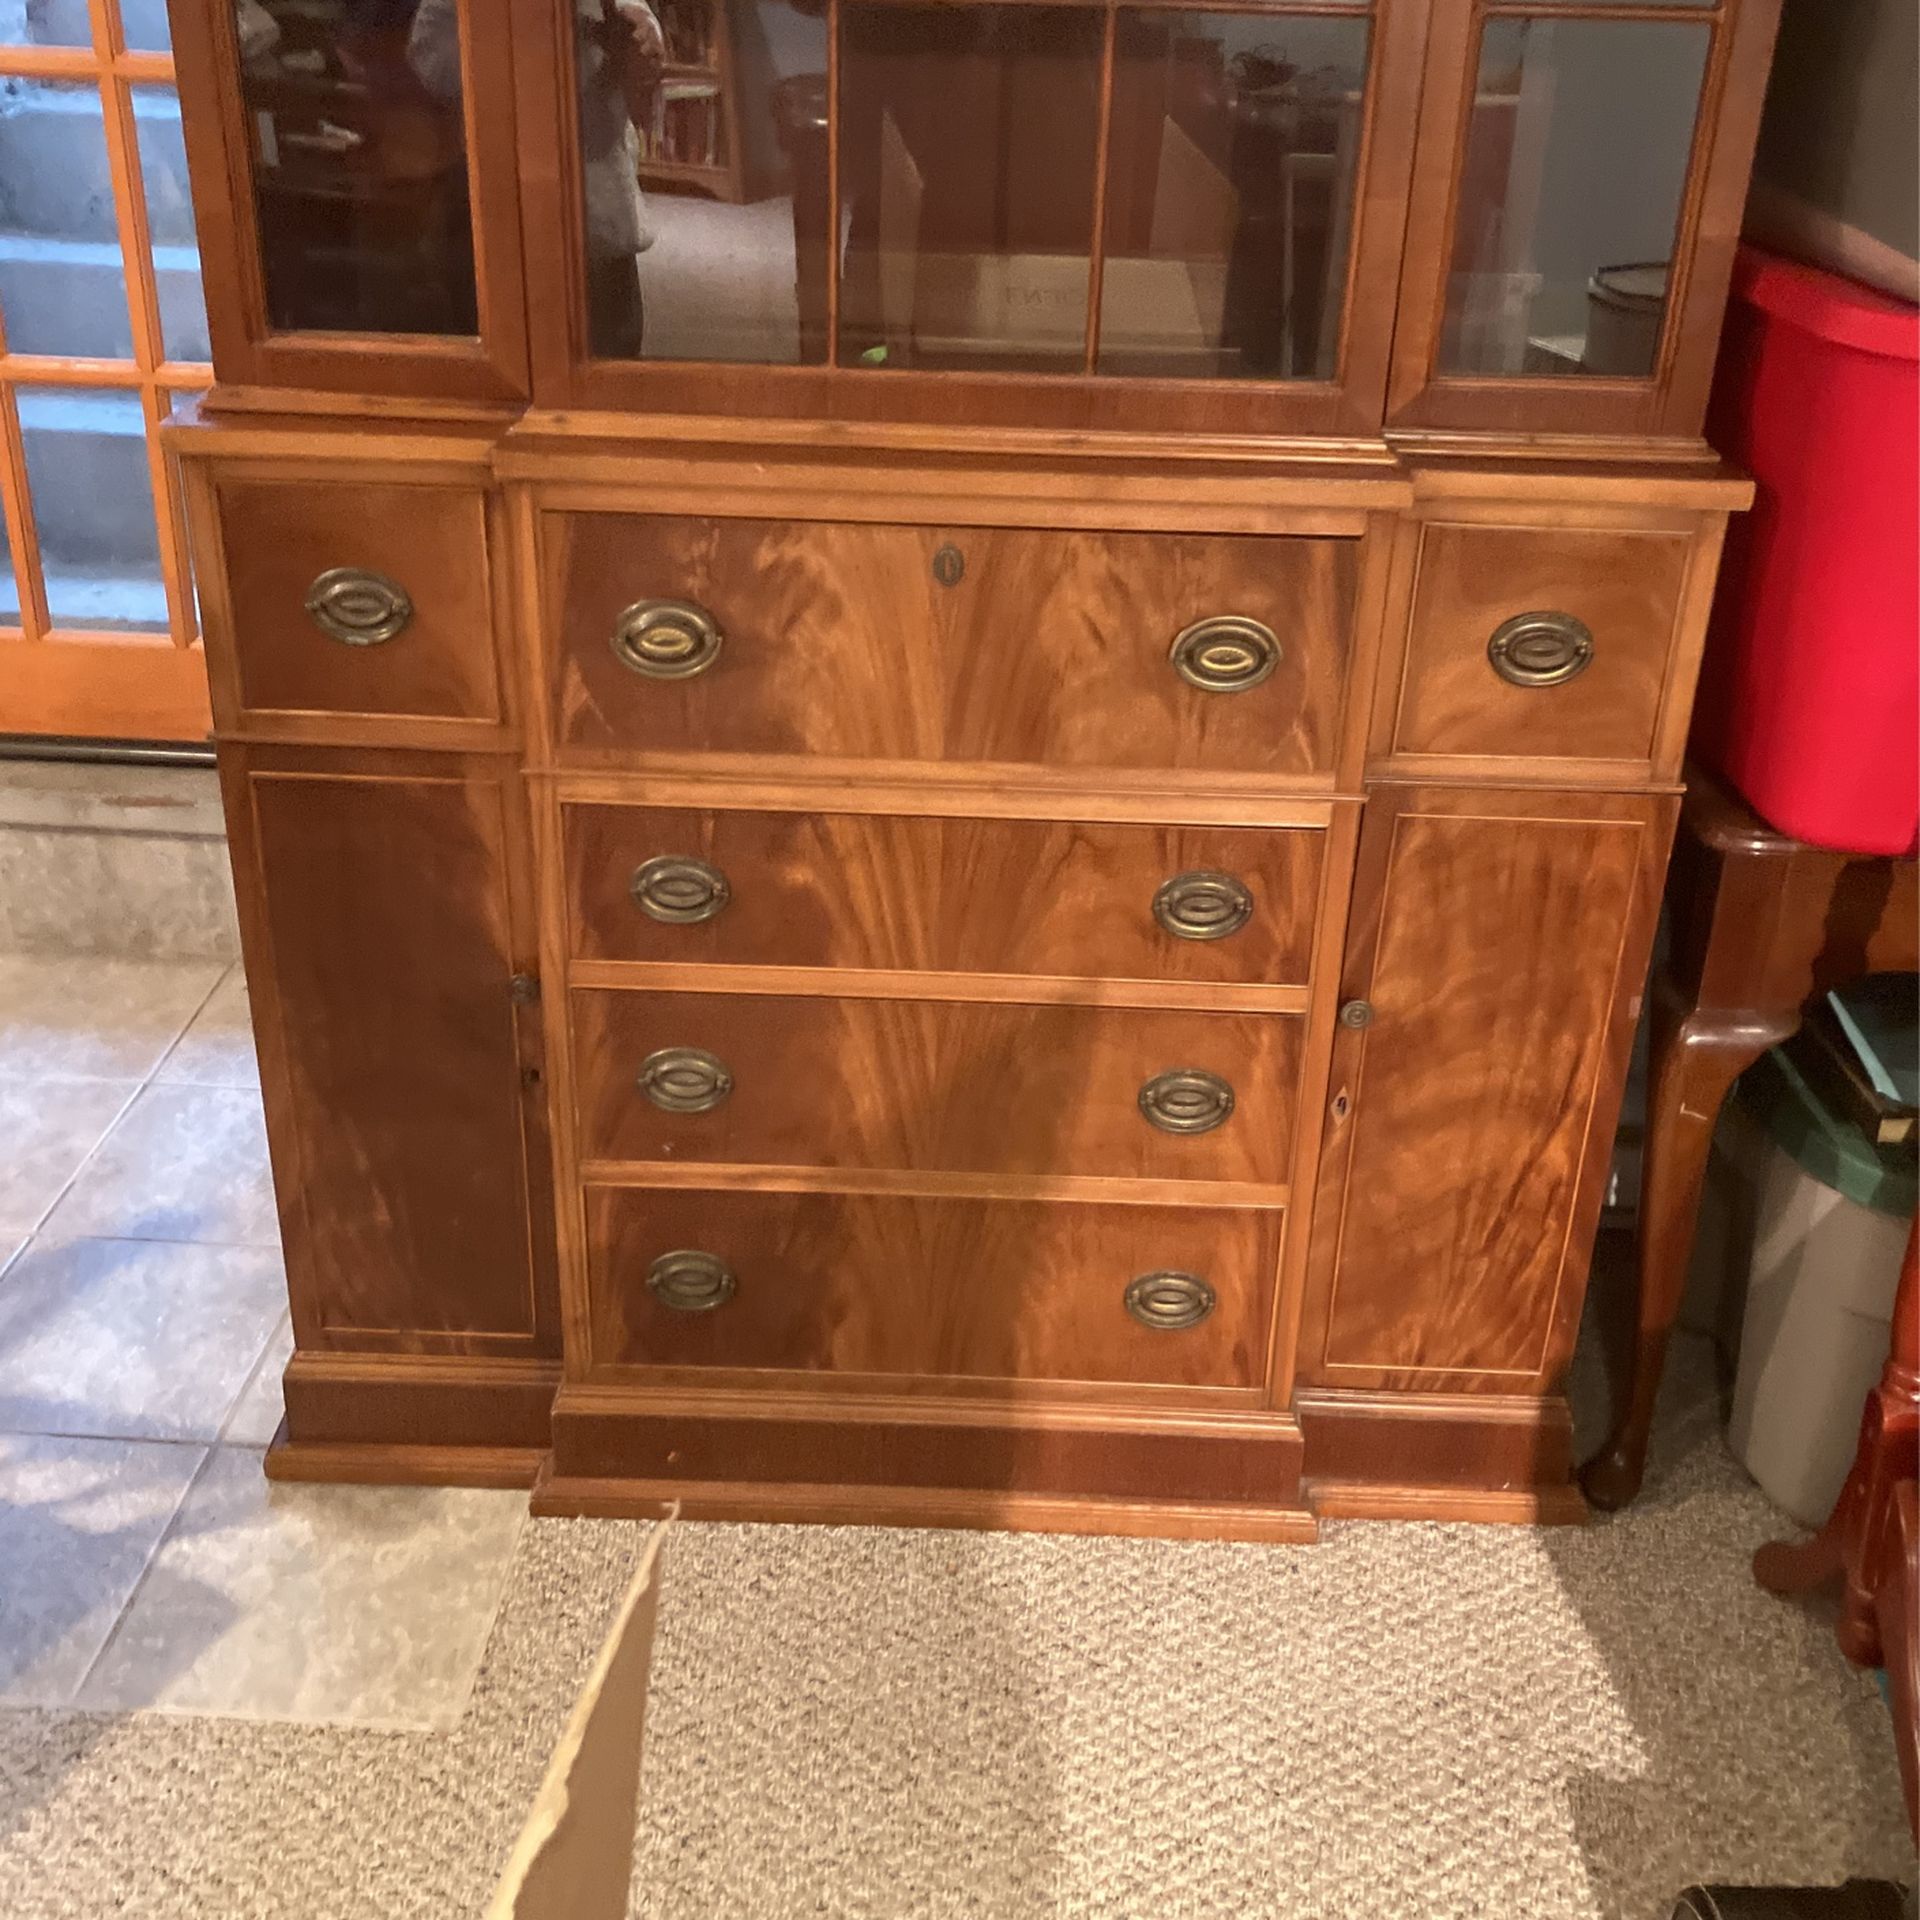 China Cabinet Very Old  make me an offer